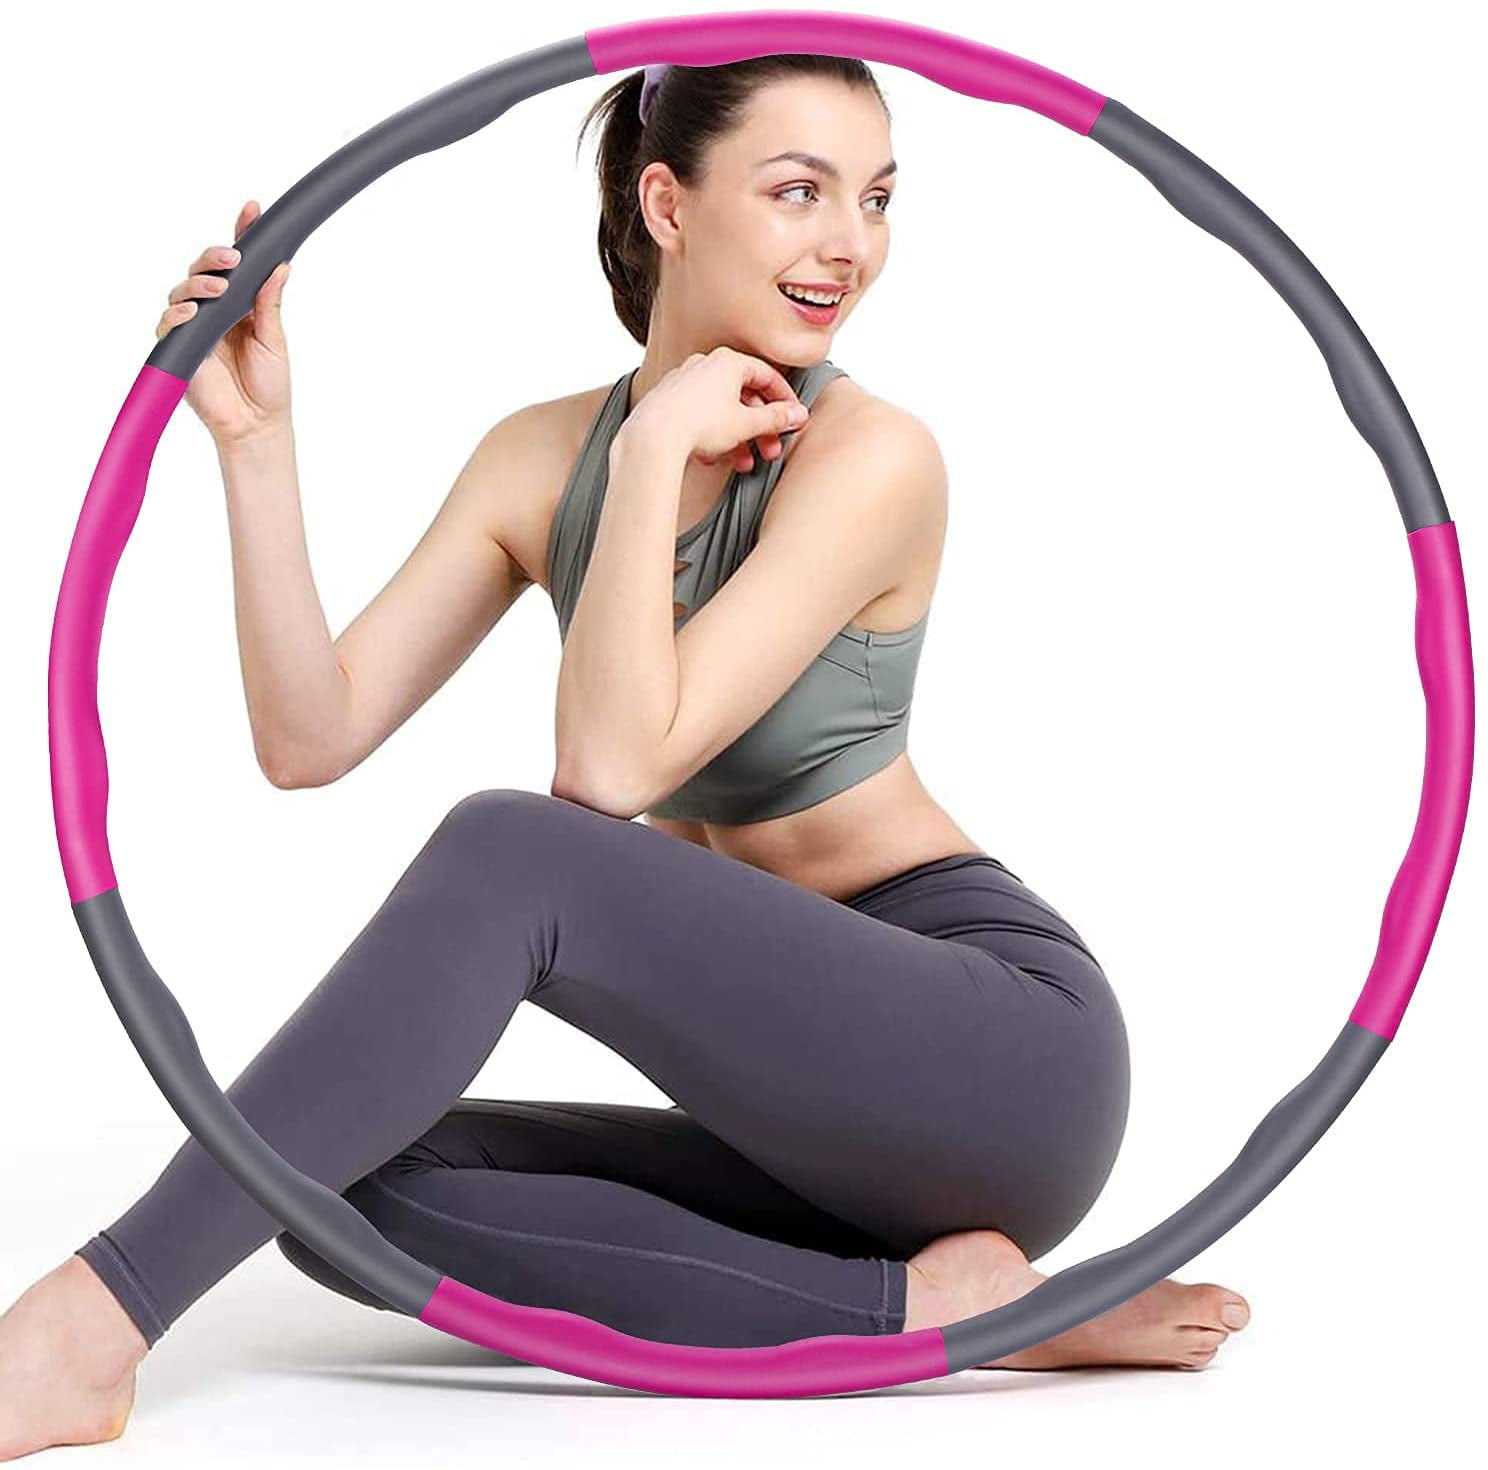 Creative LED Glowing Sport  Hoop Colorful Fitness Exercise Waist Ring Hoop 